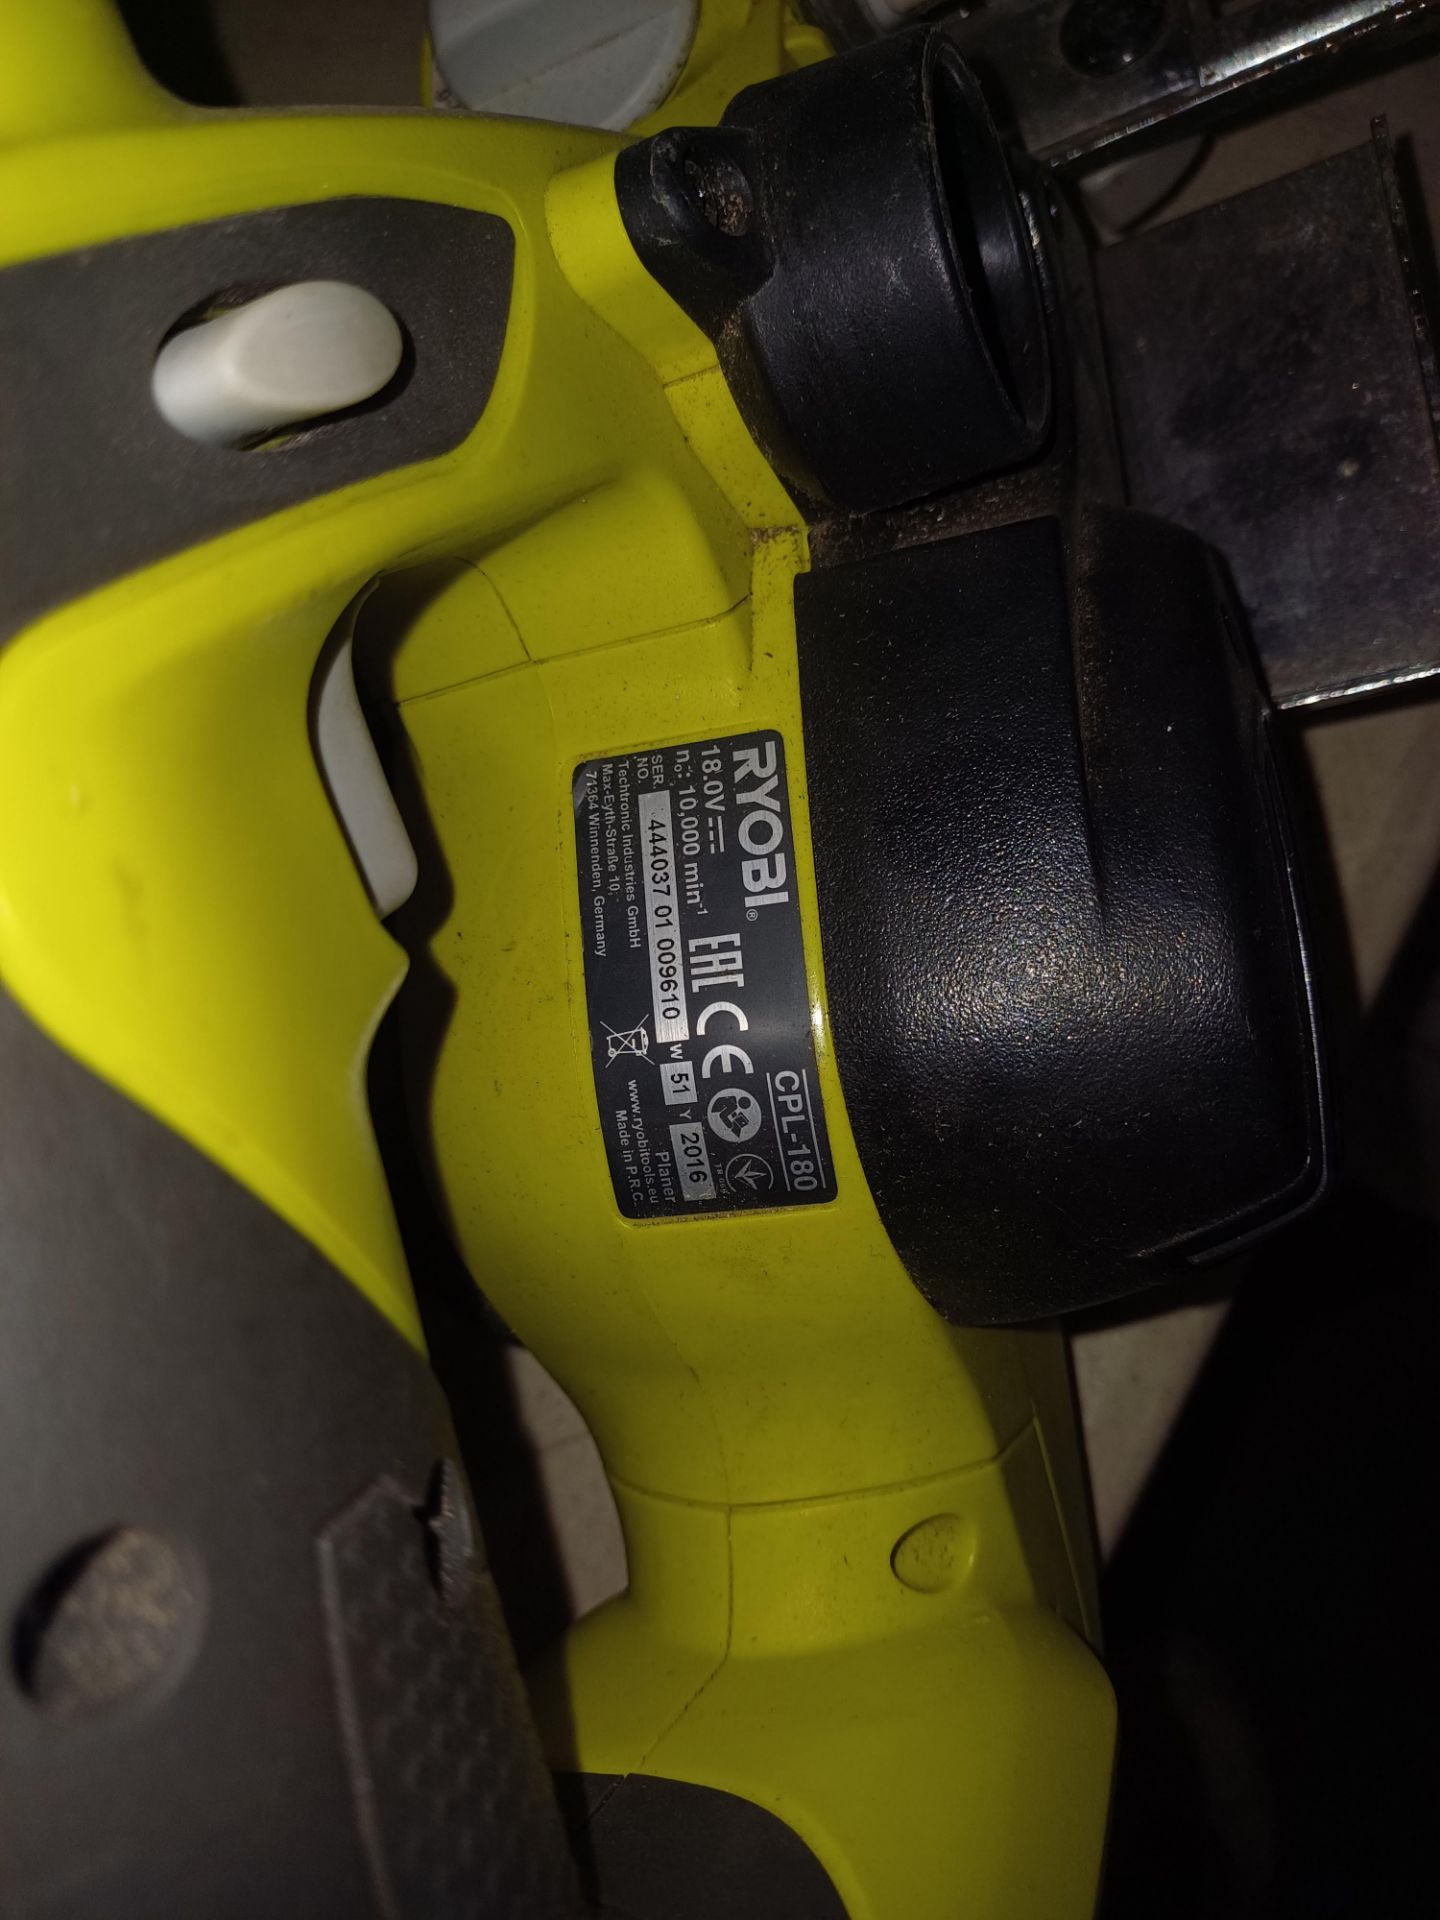 Ryobi 18 Volt Plain Circular Saw with 1 Battery & No Charger Serial NON: 4403701009610 (2006) - Image 2 of 4